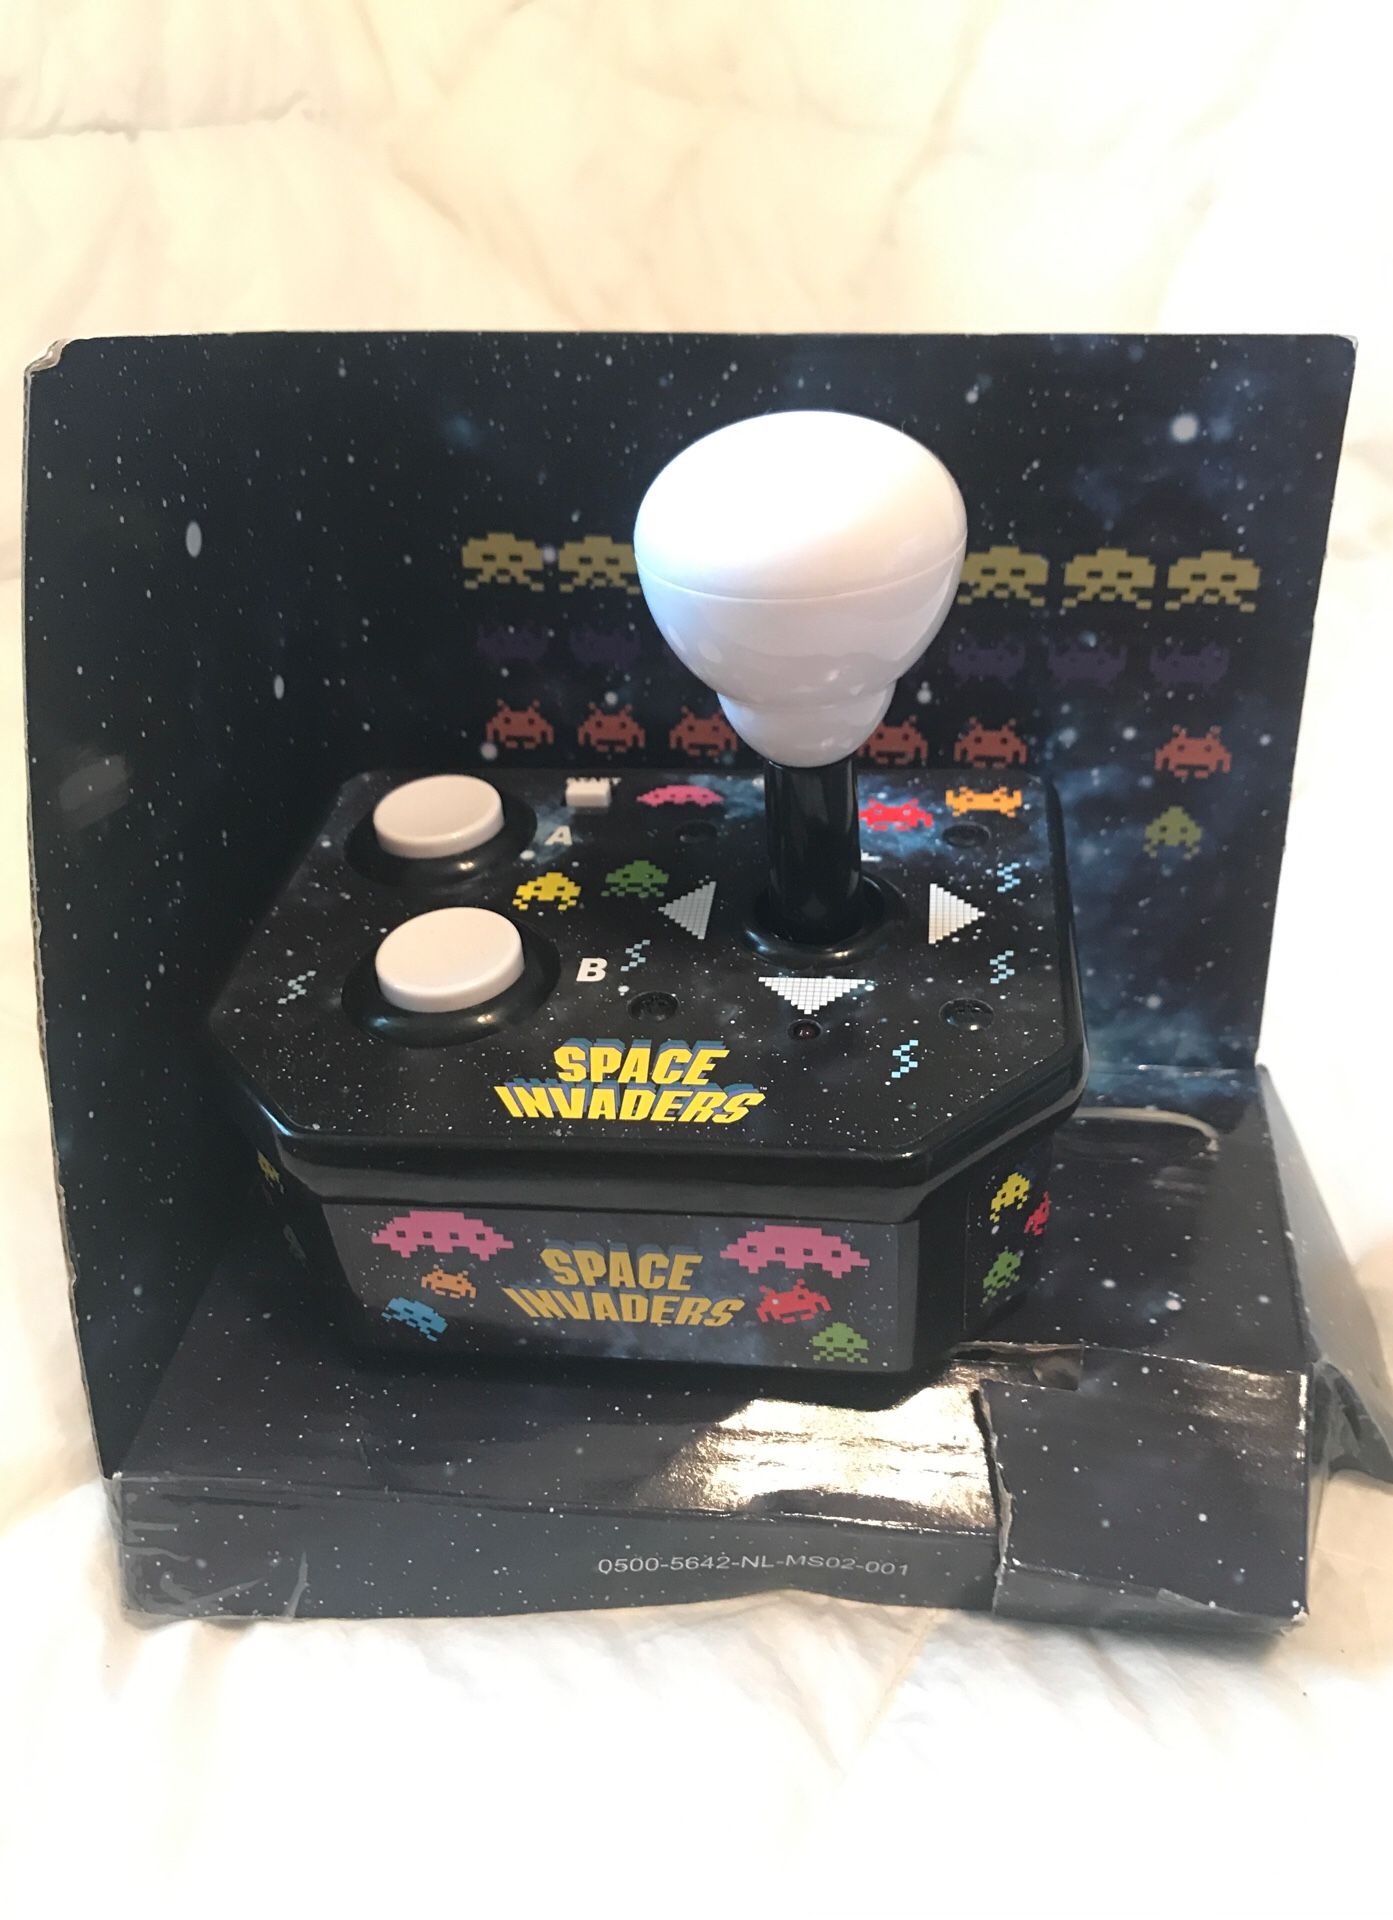 Space Invaders Plug N' Play TV Arcade / Classic Retro Game Brand New